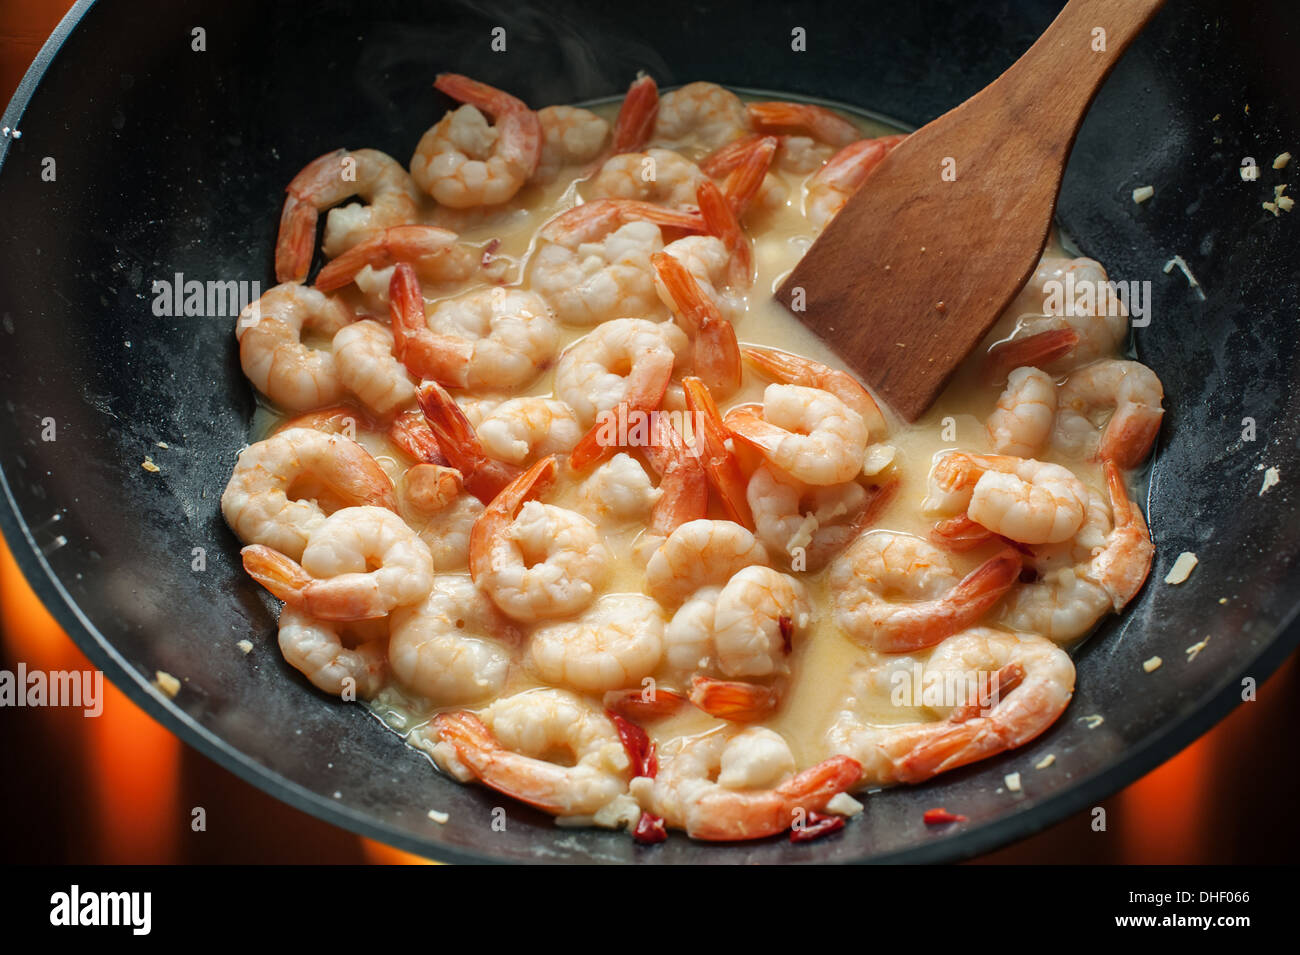 shrimps in wok close up Stock Photo